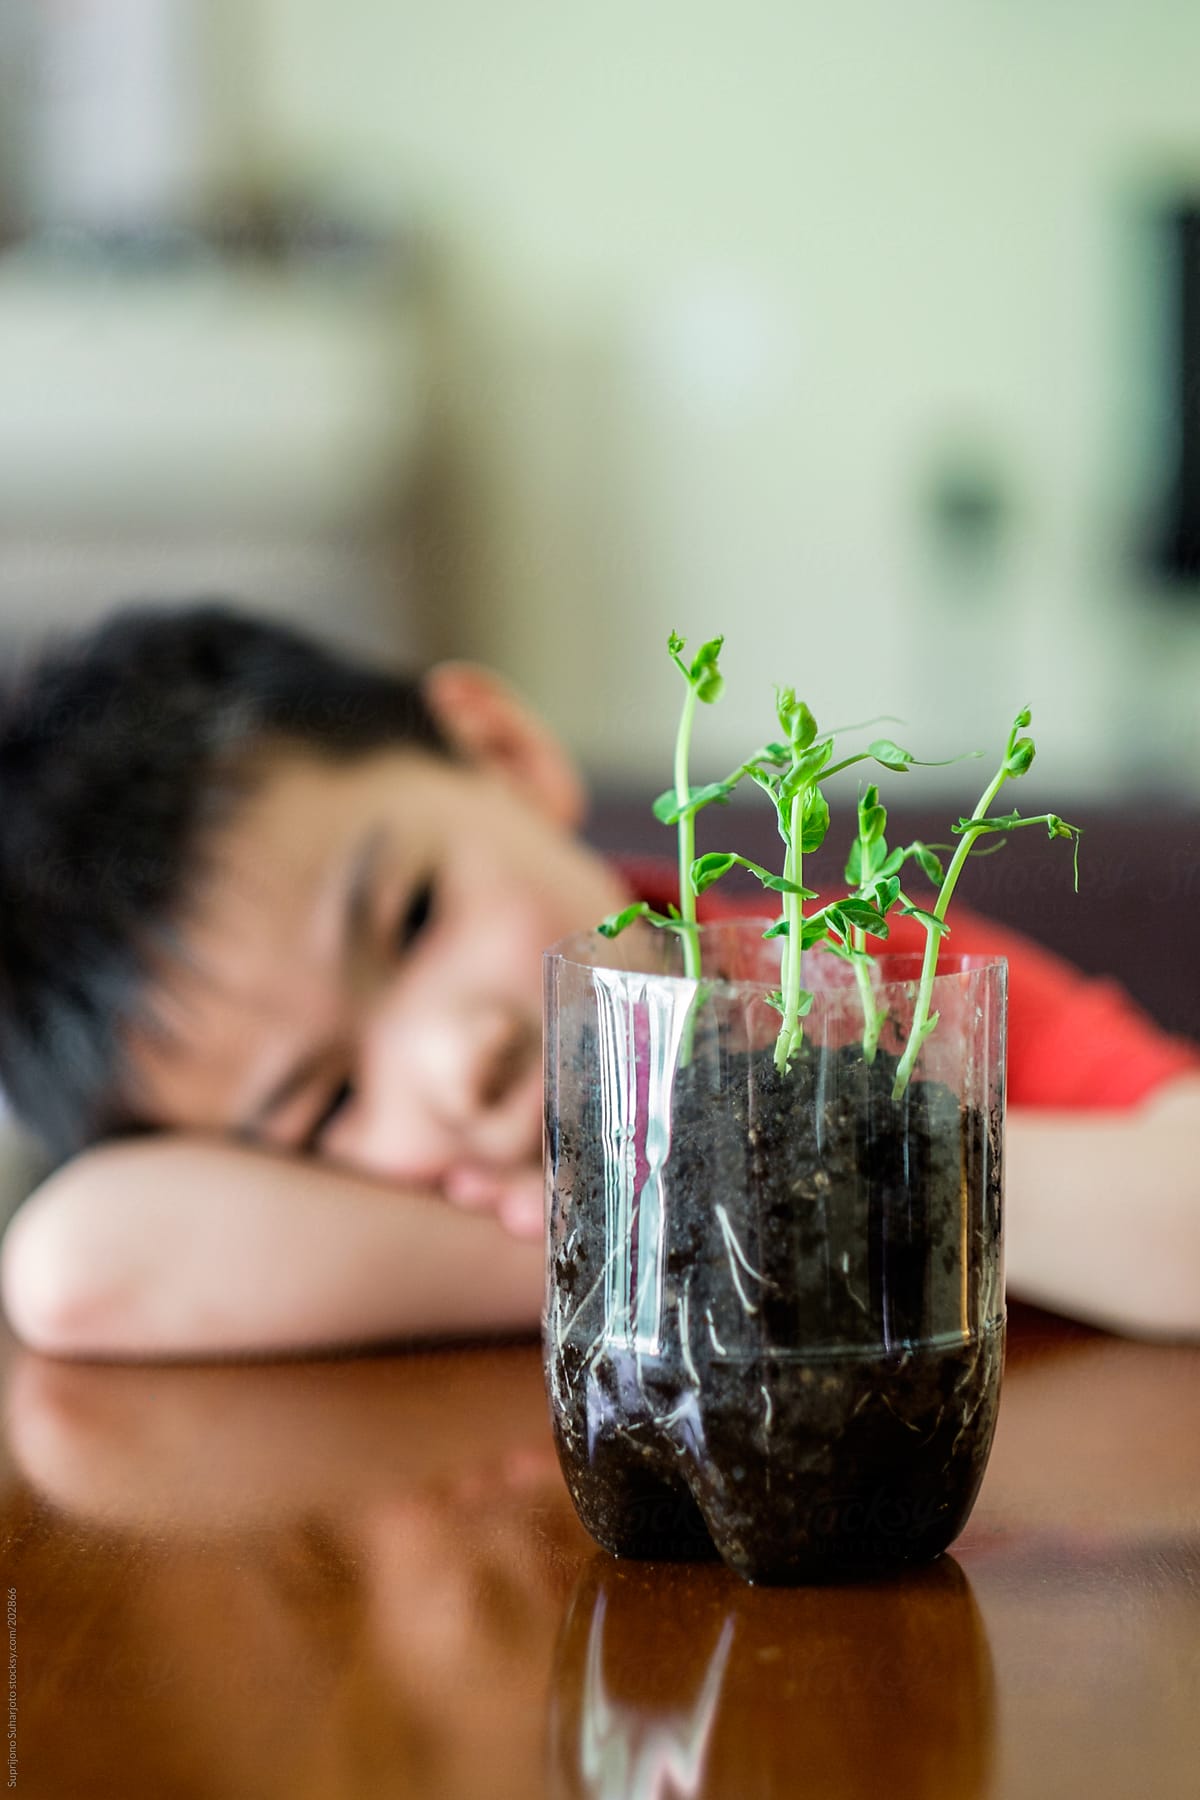 Asian Boy Watching The Growth Of His Plant As Part Of The Science